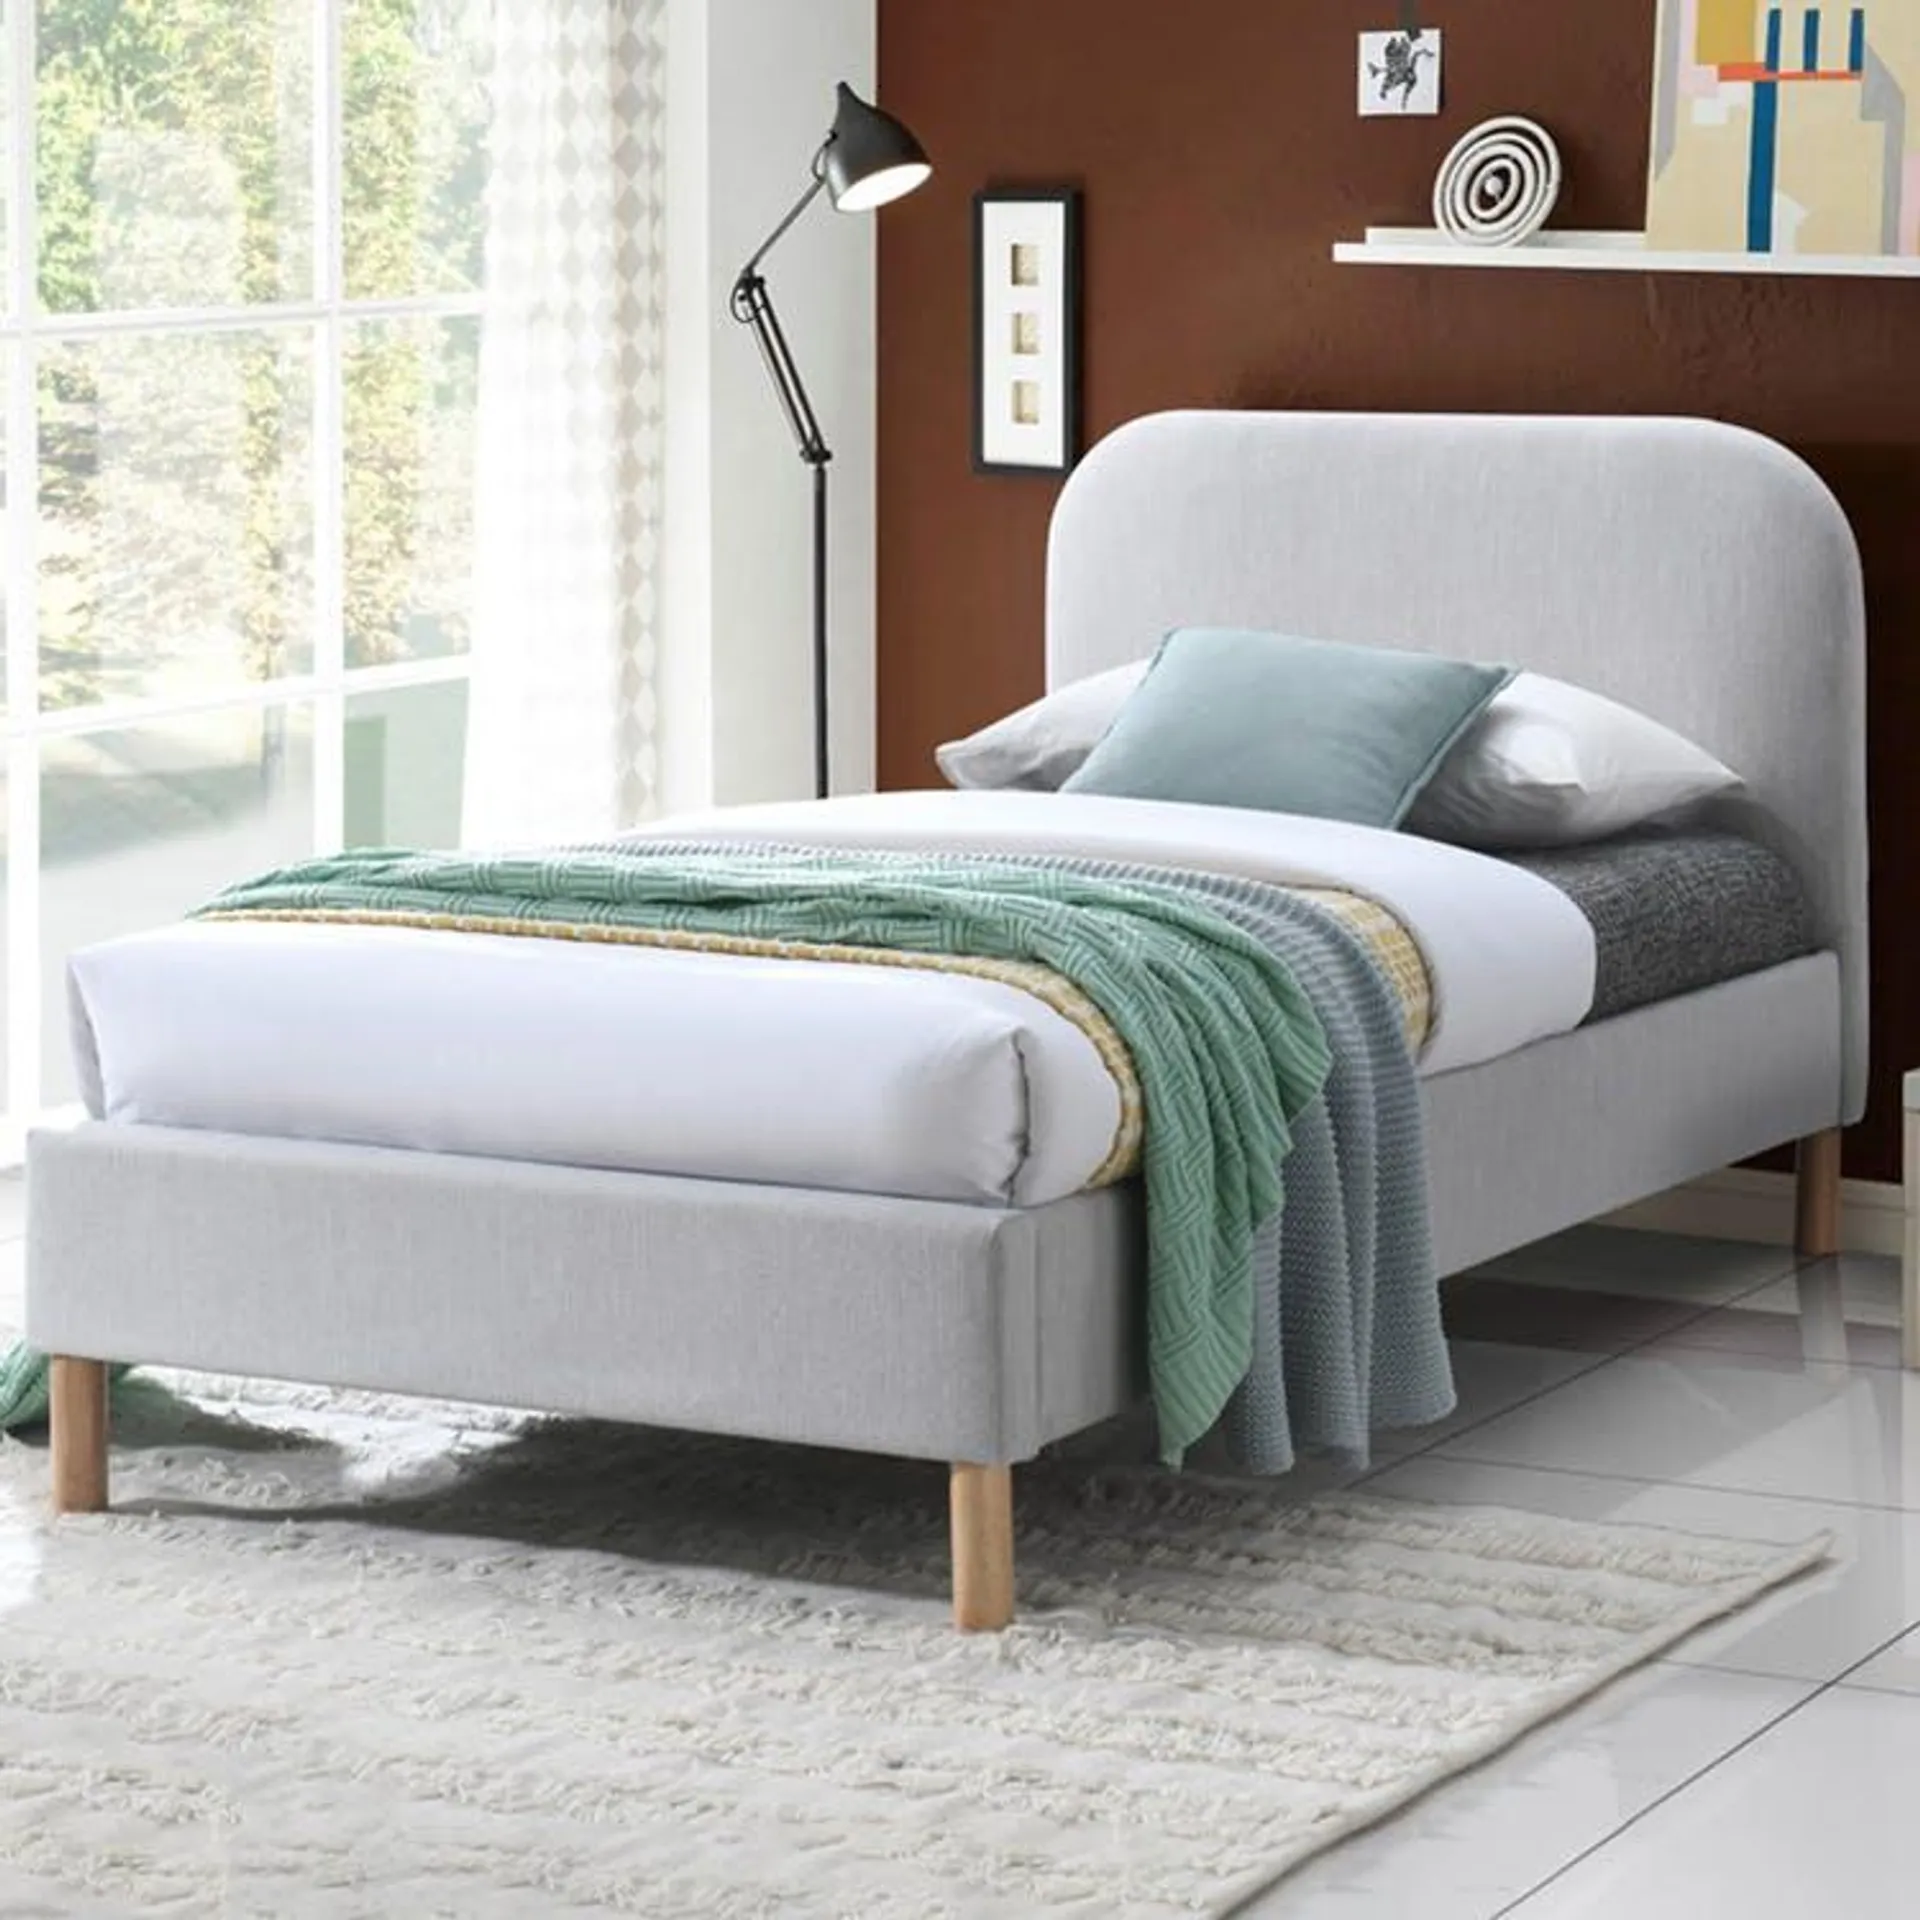 Arden Curved Headboard Bed Frame, Stone